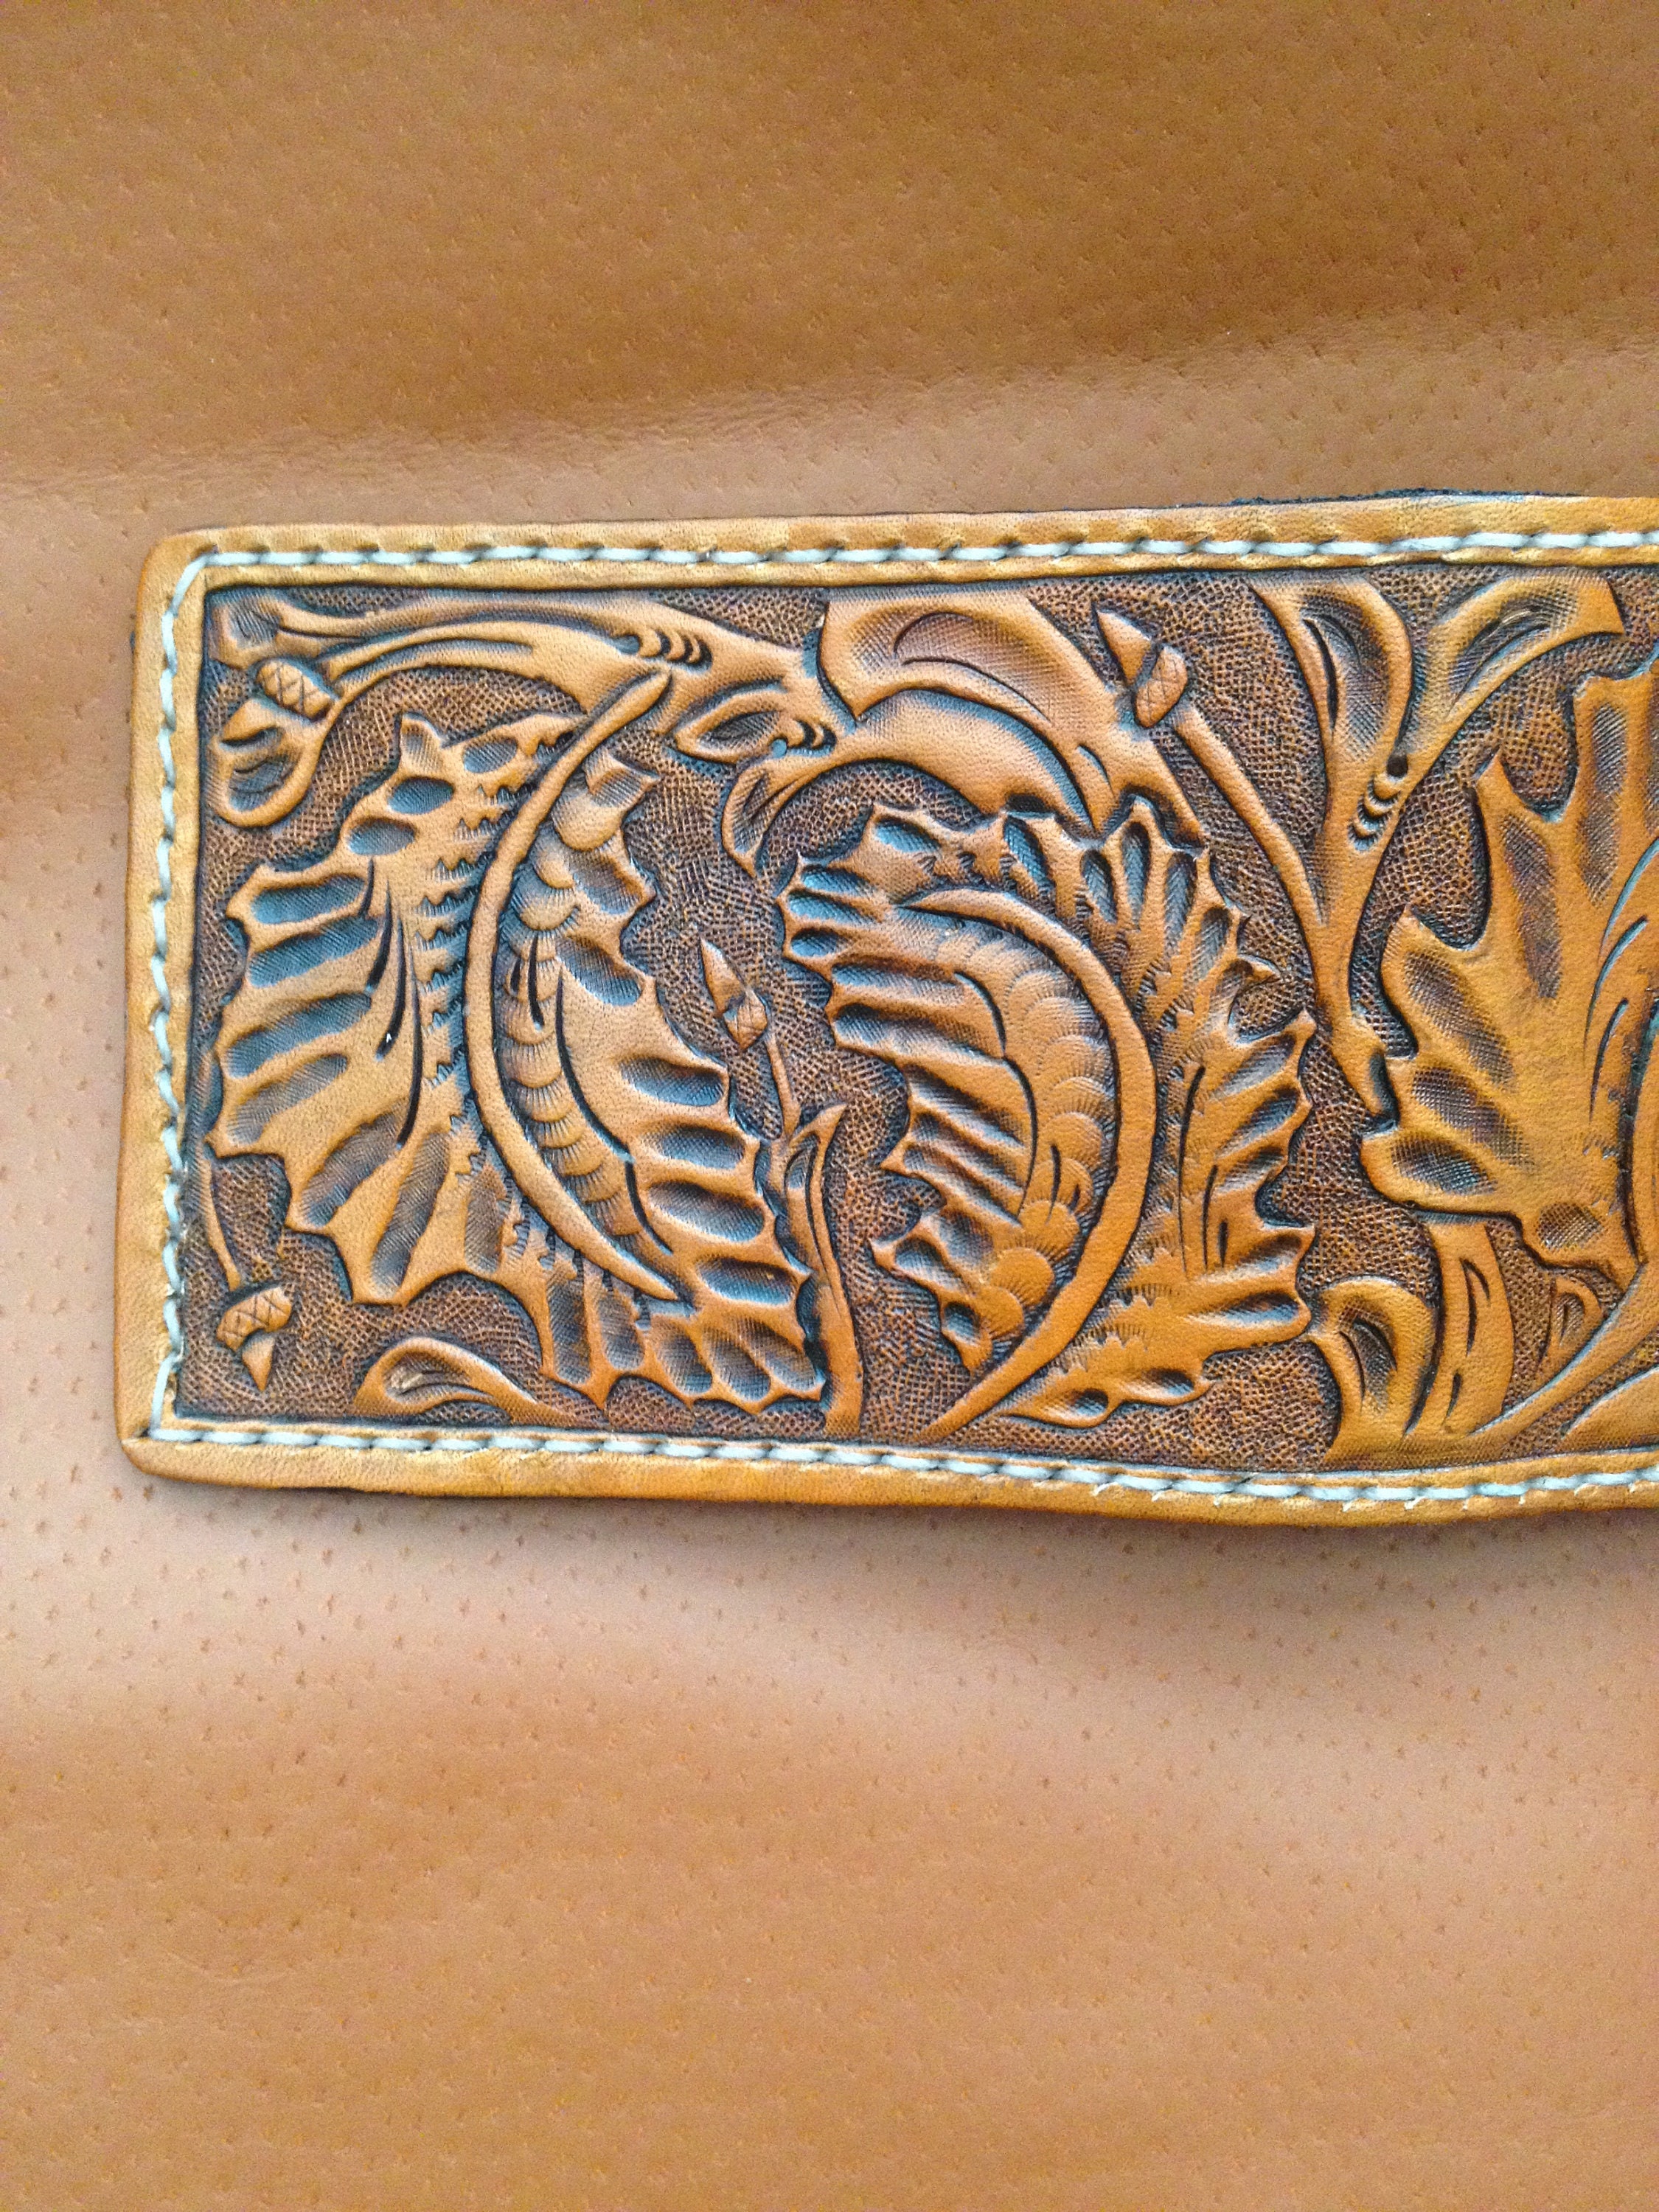 Hand tooled leather wallet | Etsy